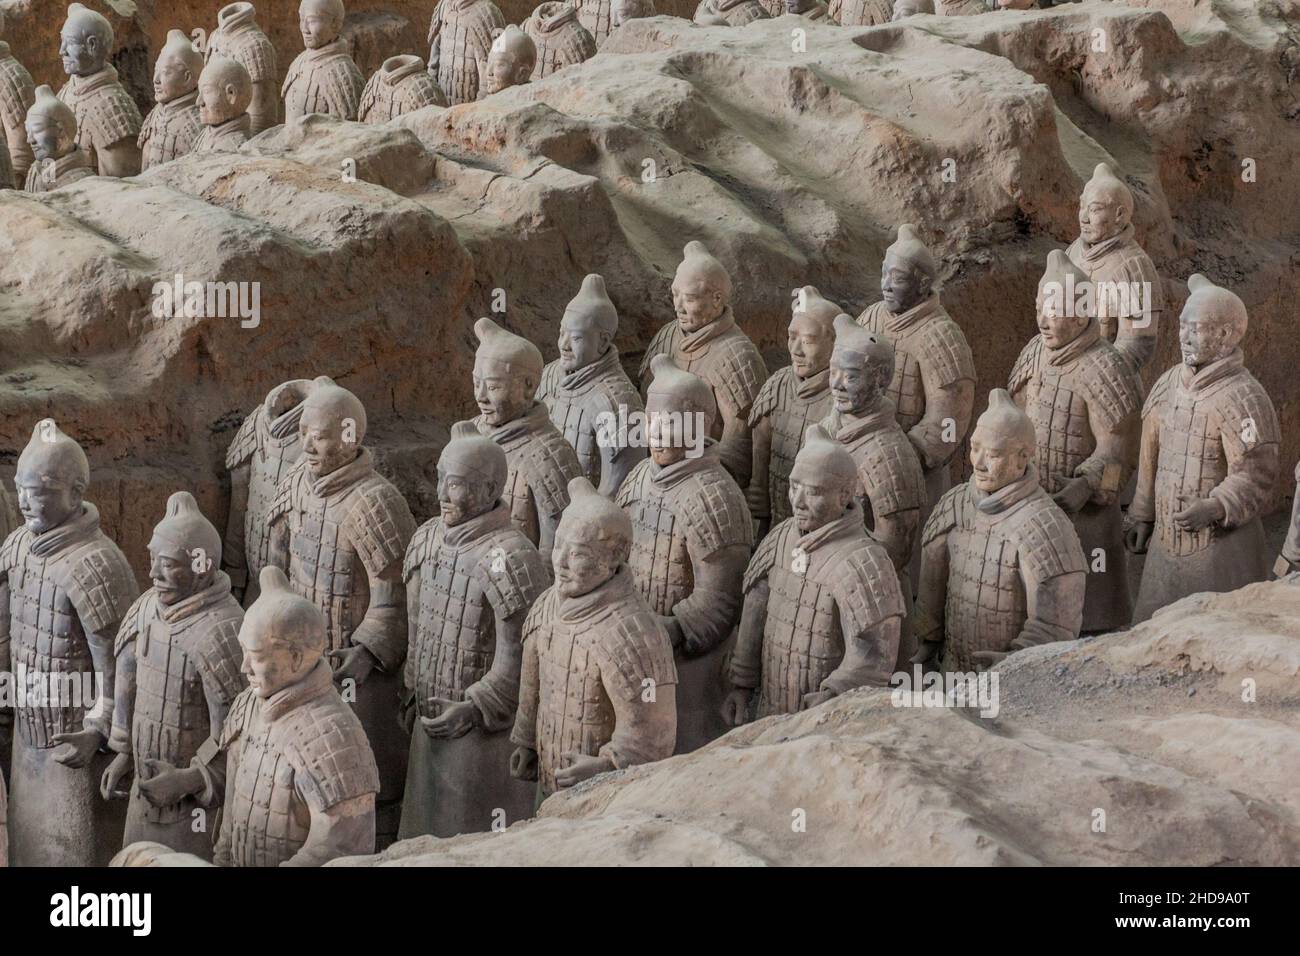 Soldier sculptures in the Pit 1 of the Army of Terracotta Warriors near Xi'an, Shaanxi province, China Stock Photo